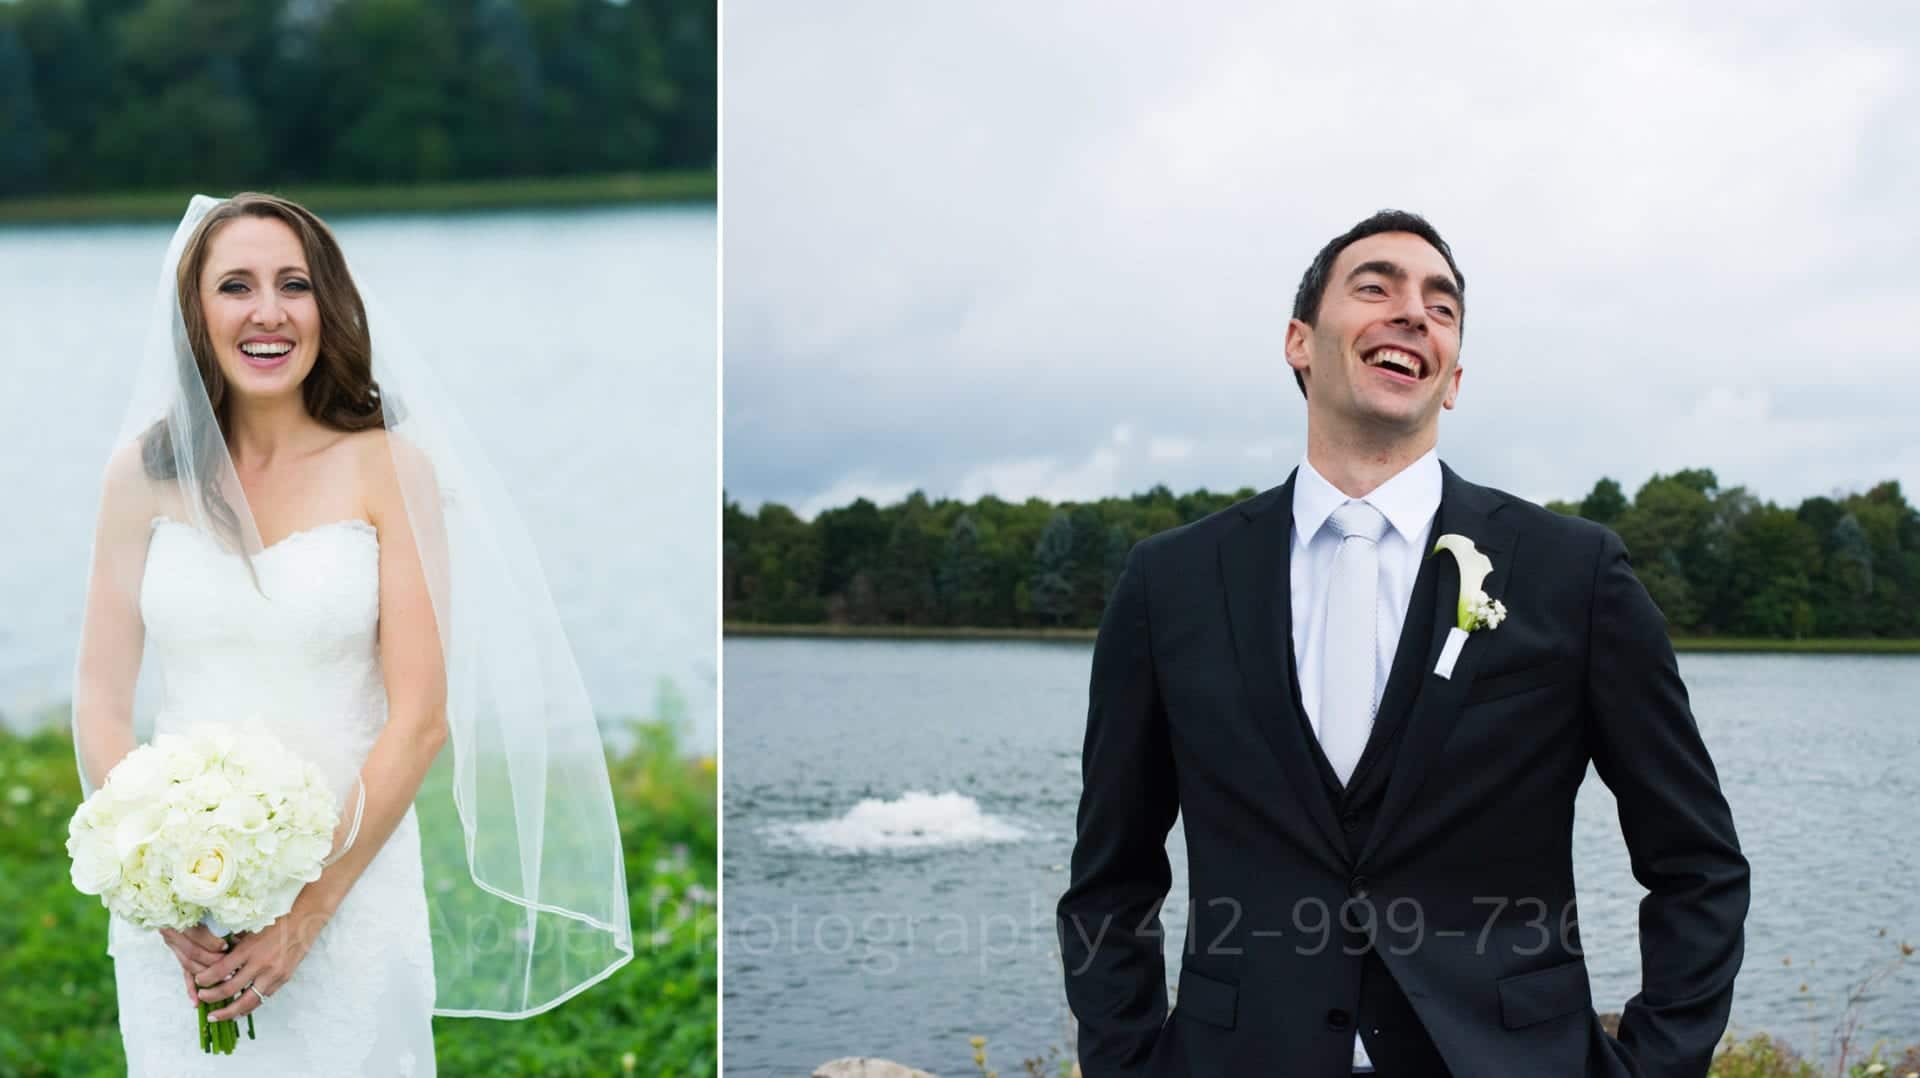 Two portraits: a bride hold hands and smiles at the camera with a lake and trees in the background. A groom laughs with his hands in the pockets of his black suit.